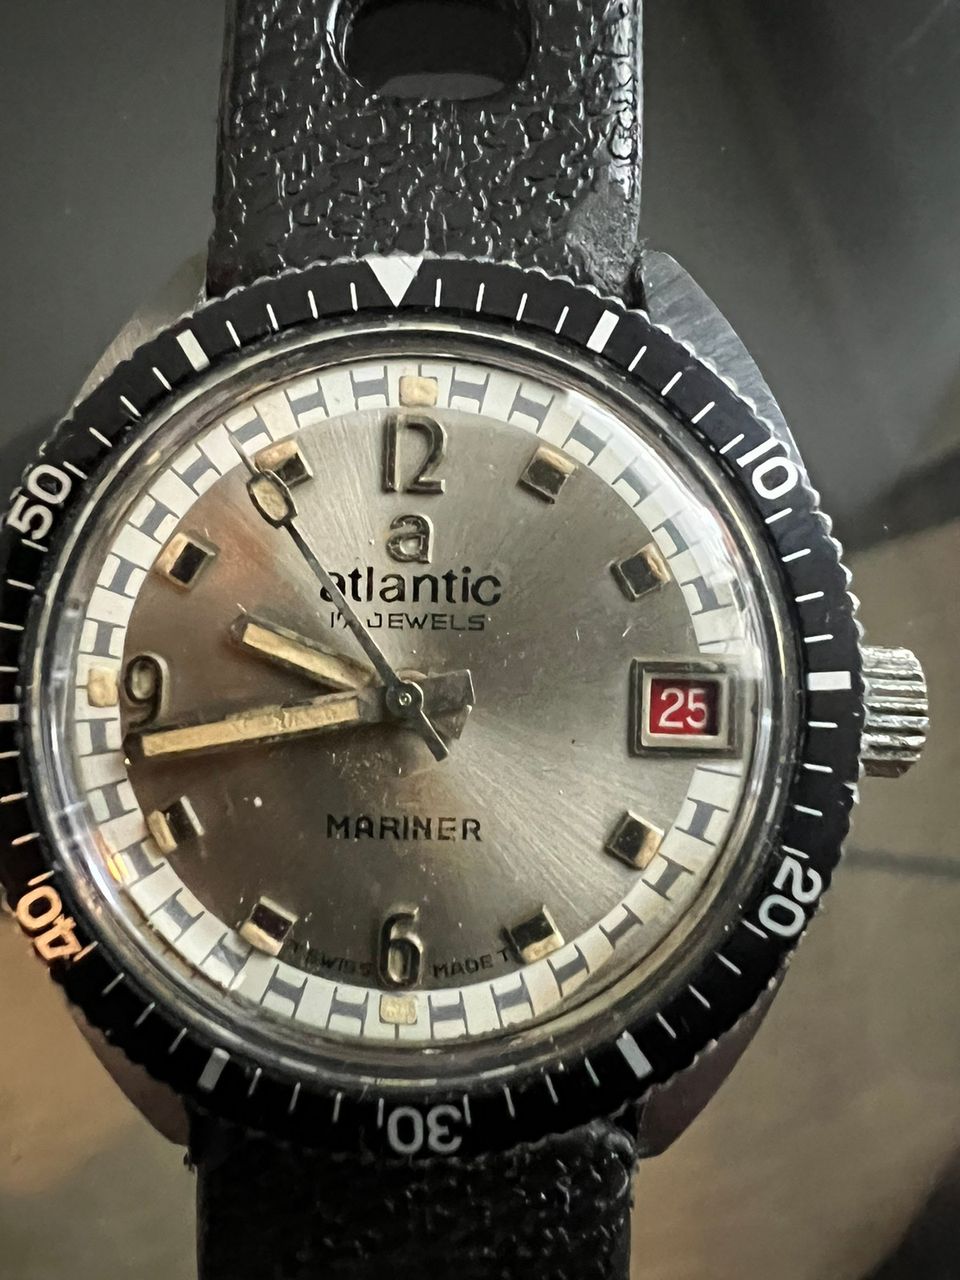 Atlantic Mariner New Old Stock SMALL Diver's mechanical vintage watch NOS